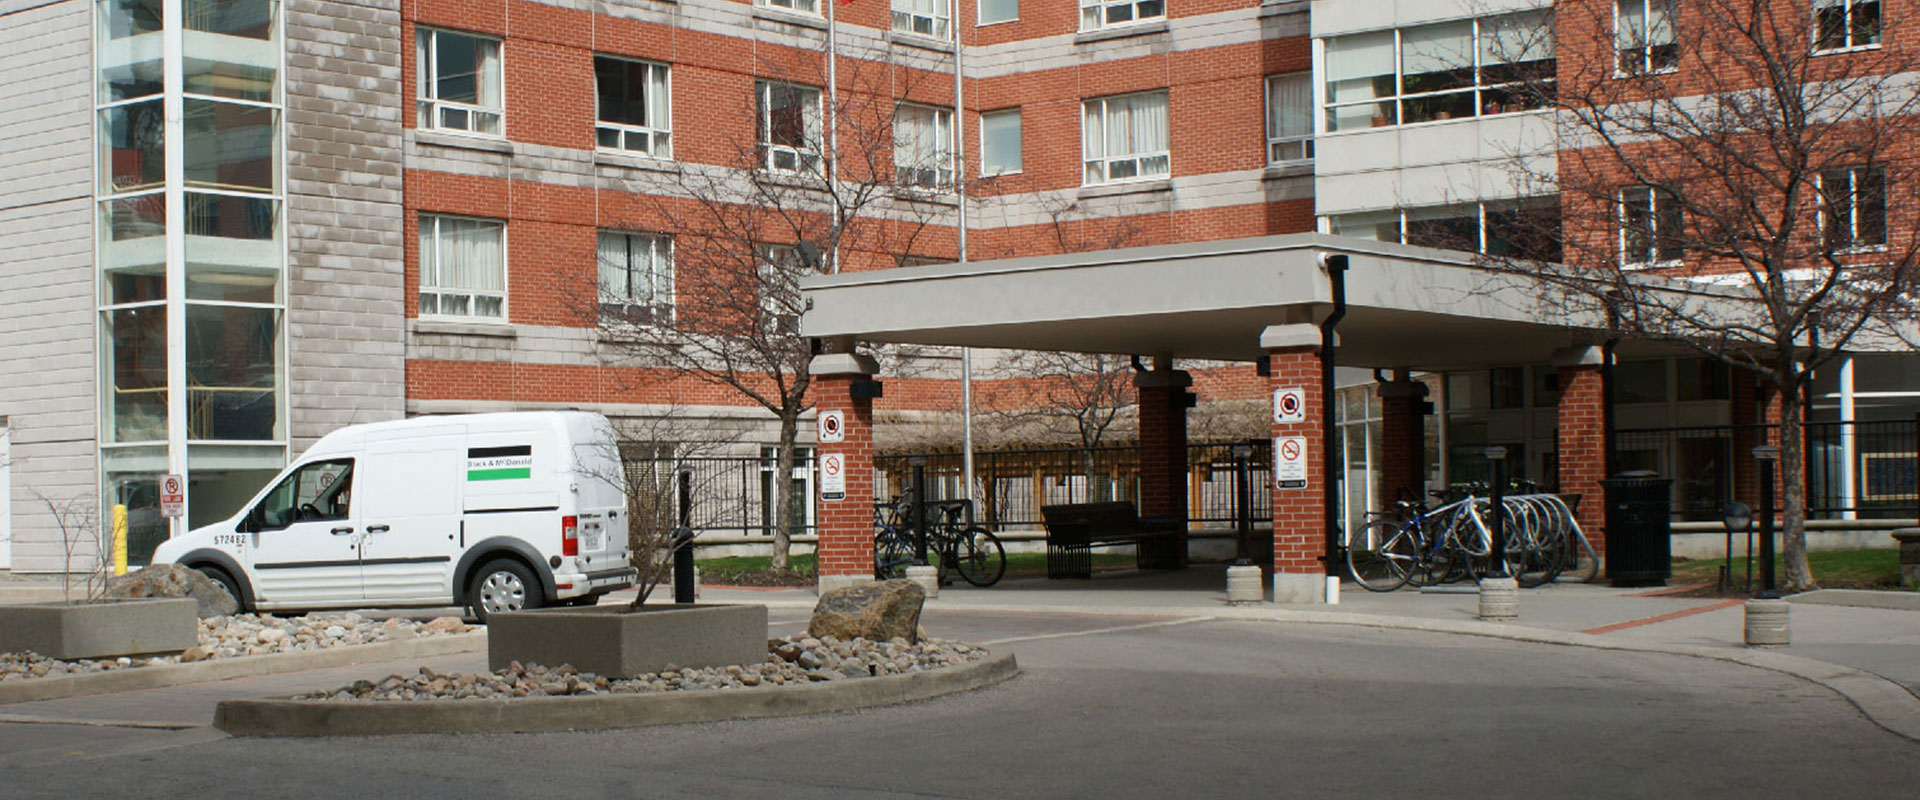 Snapshot of a long term care home facility managed by Black & McDonald